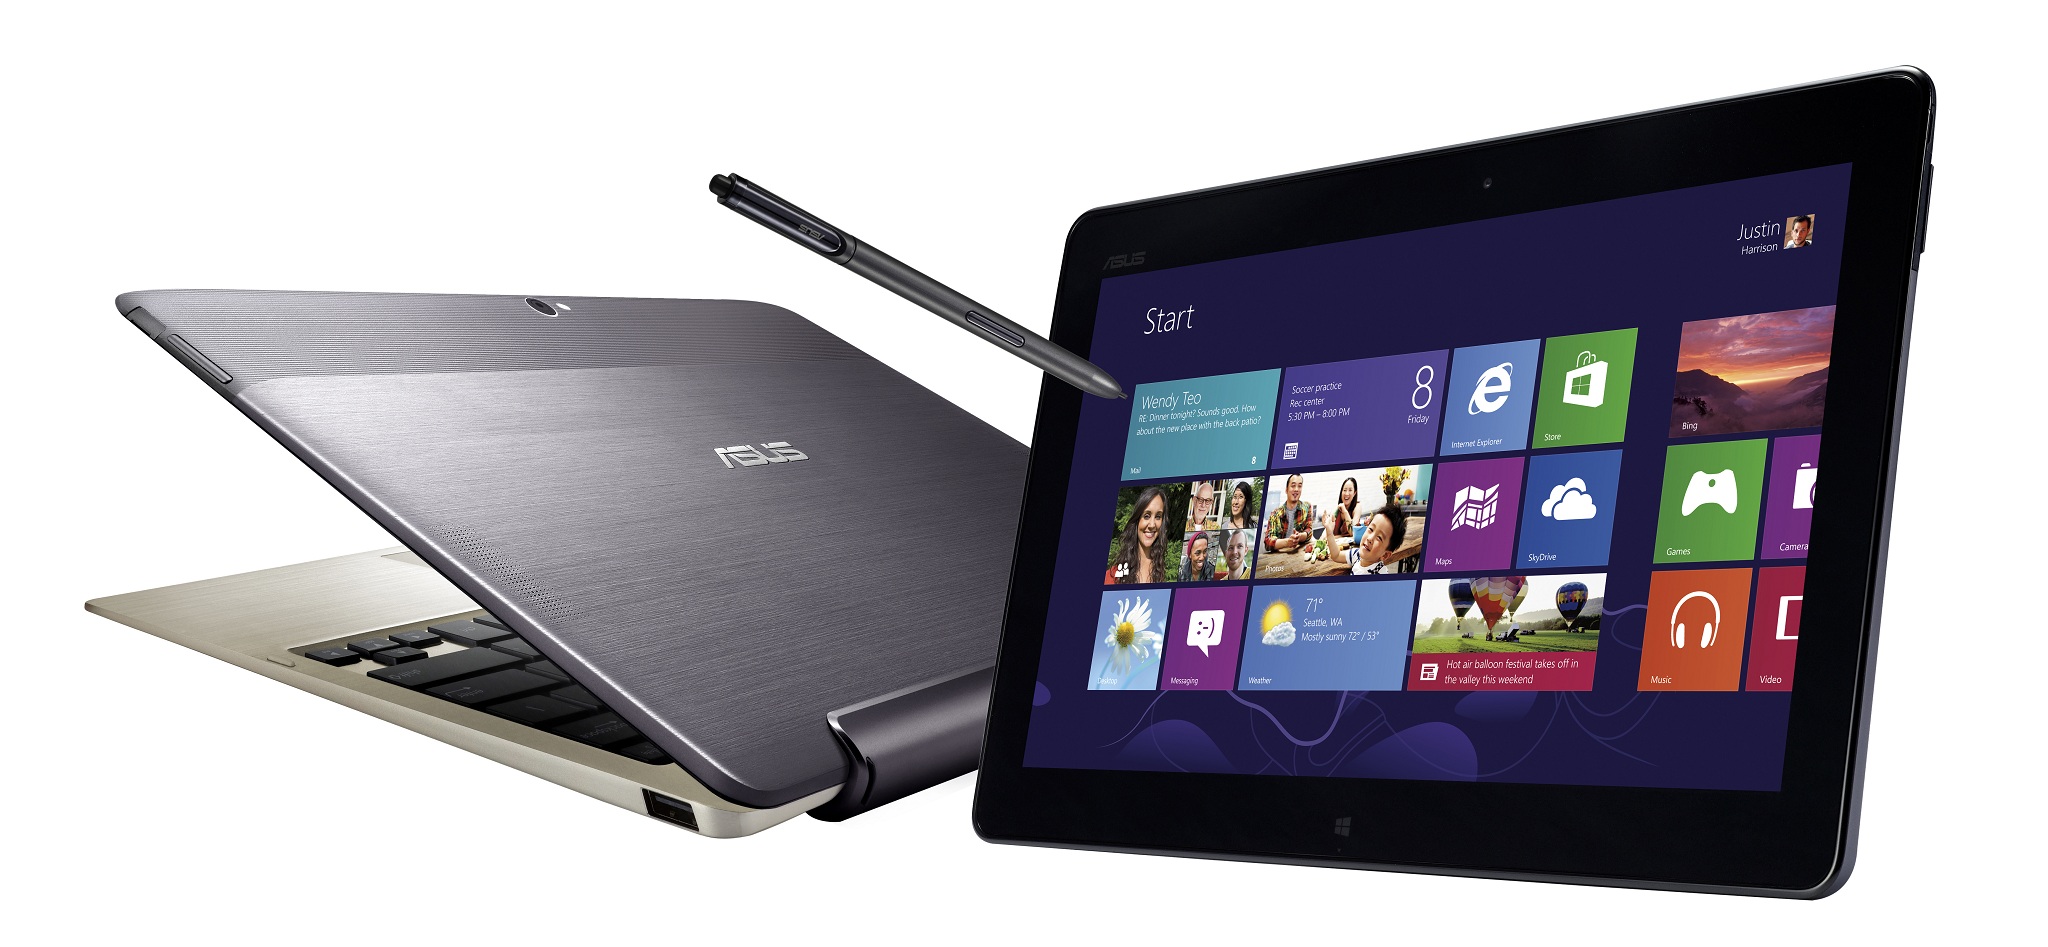 ASUS Windows 8 and RT Products Revealed